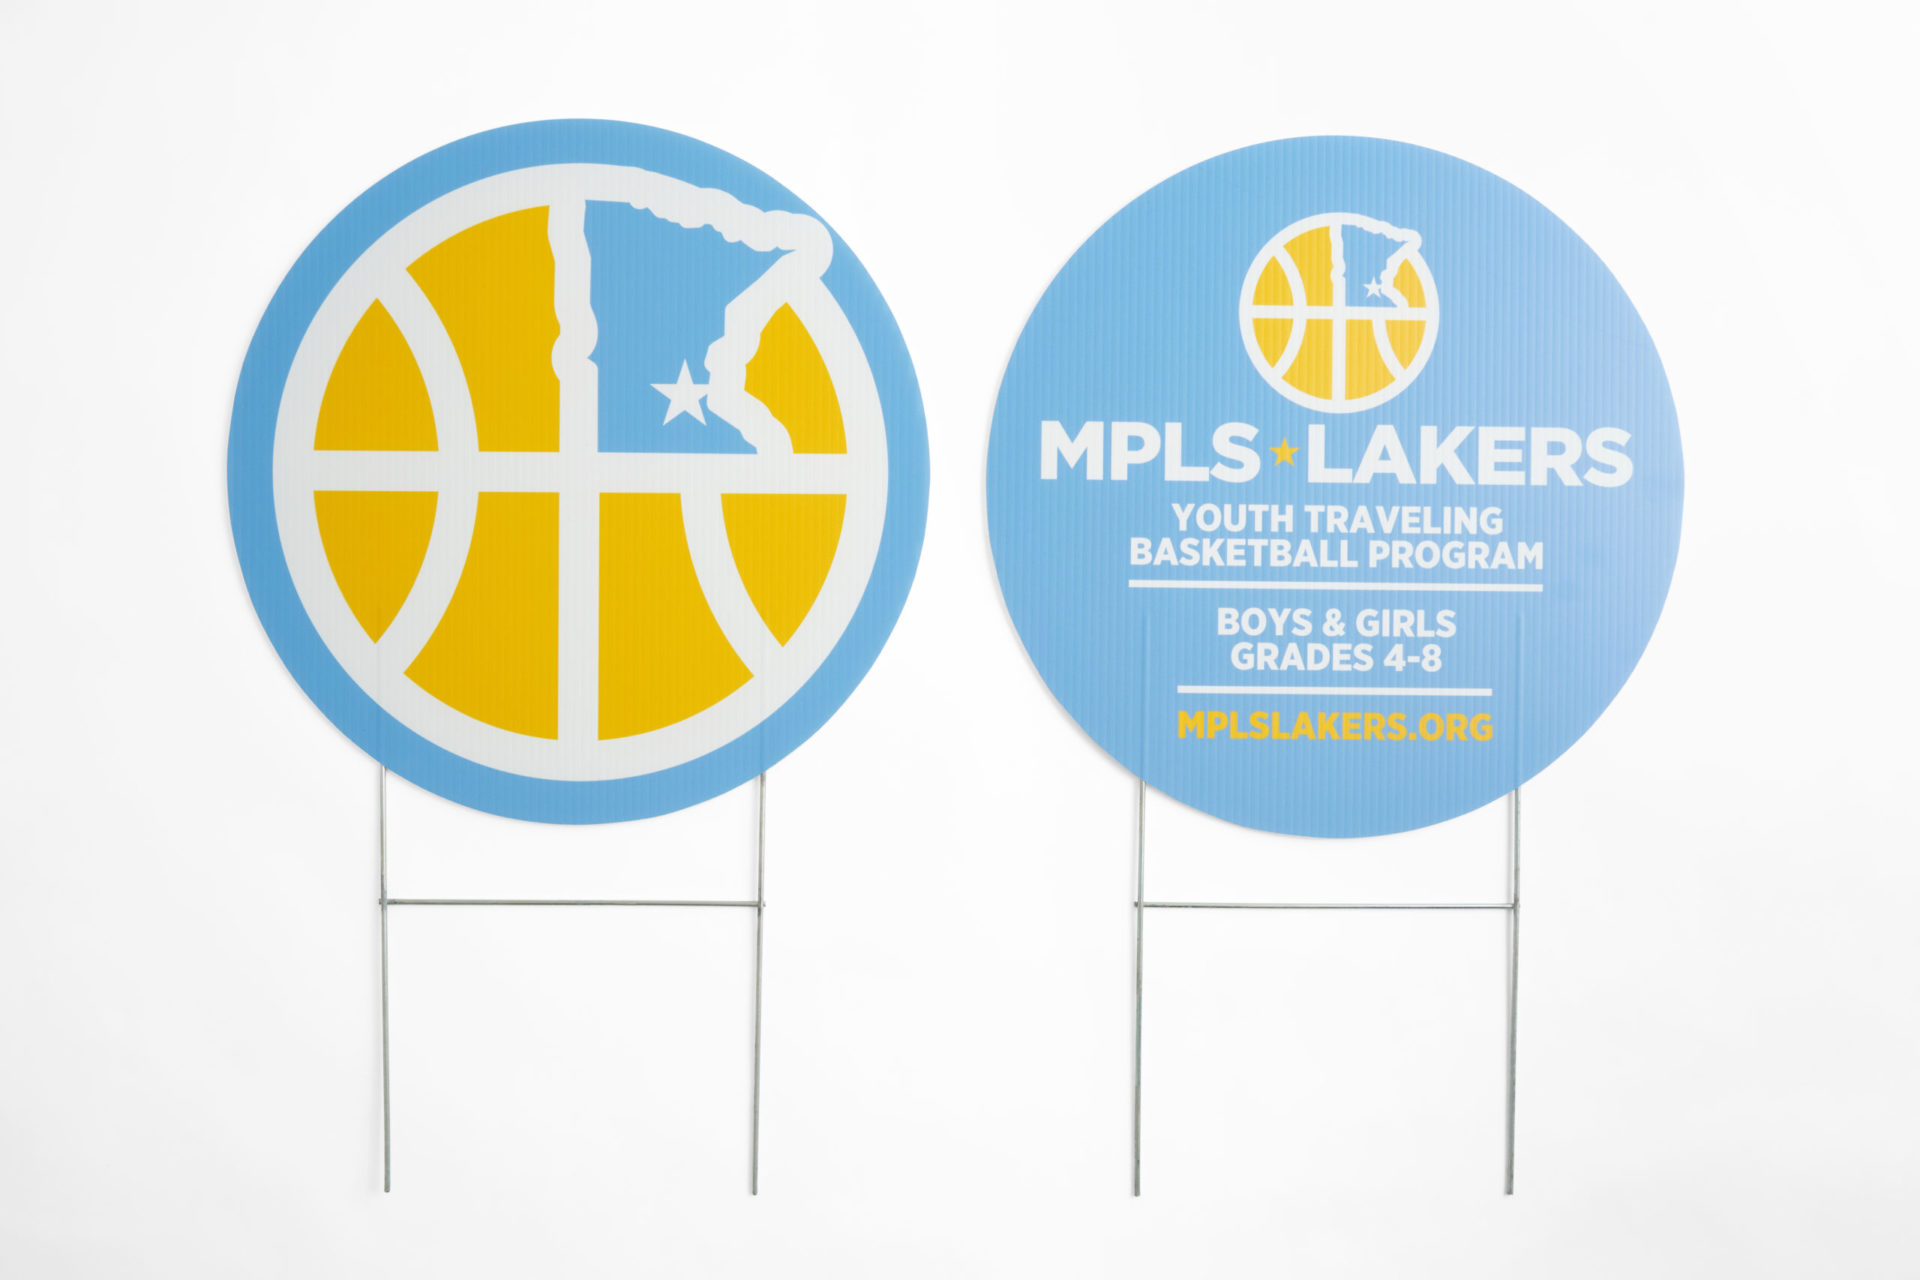 Two round yard signs printed with a light blue and yellow design and MPLS Lakers in white.